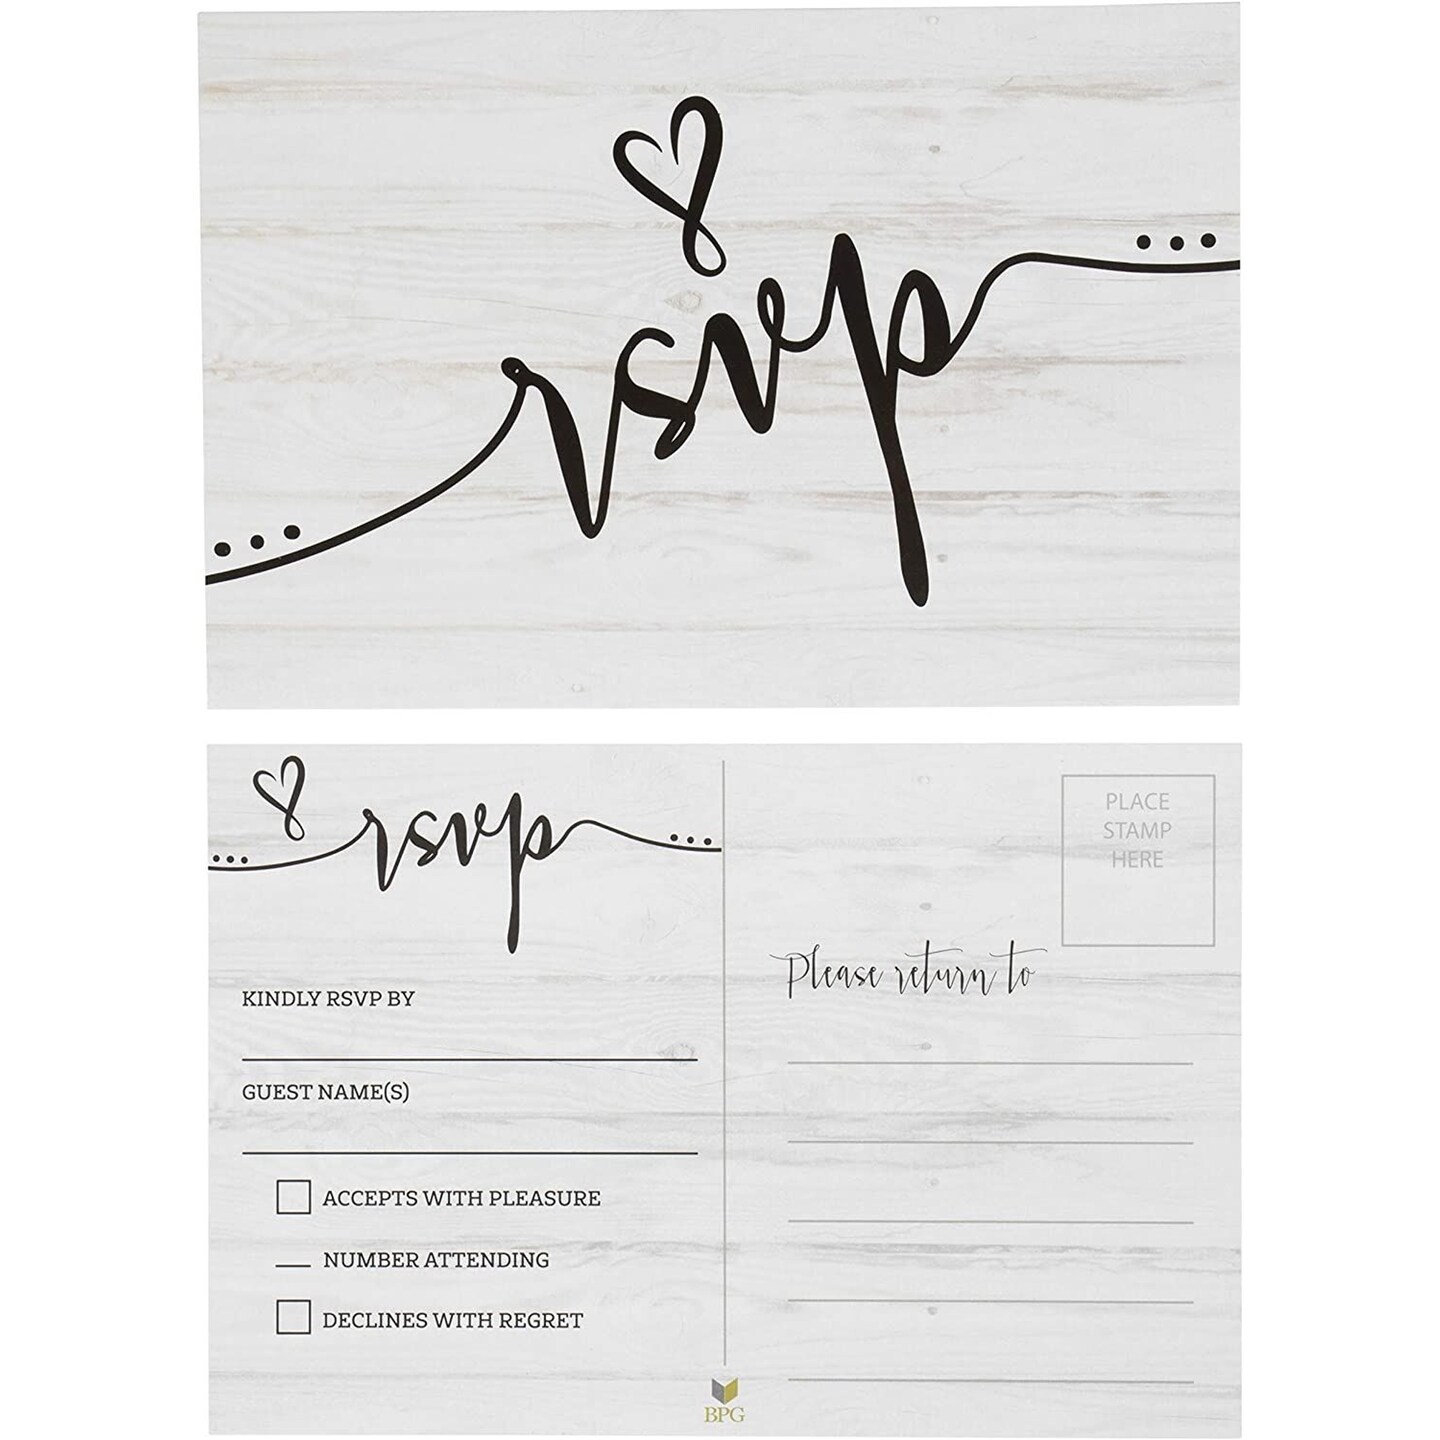 60 Pack RSVP Postcards for Wedding, Rehearsal Dinner, Bridal Shower, Birthday Party with Mailing Side (4x6 In)